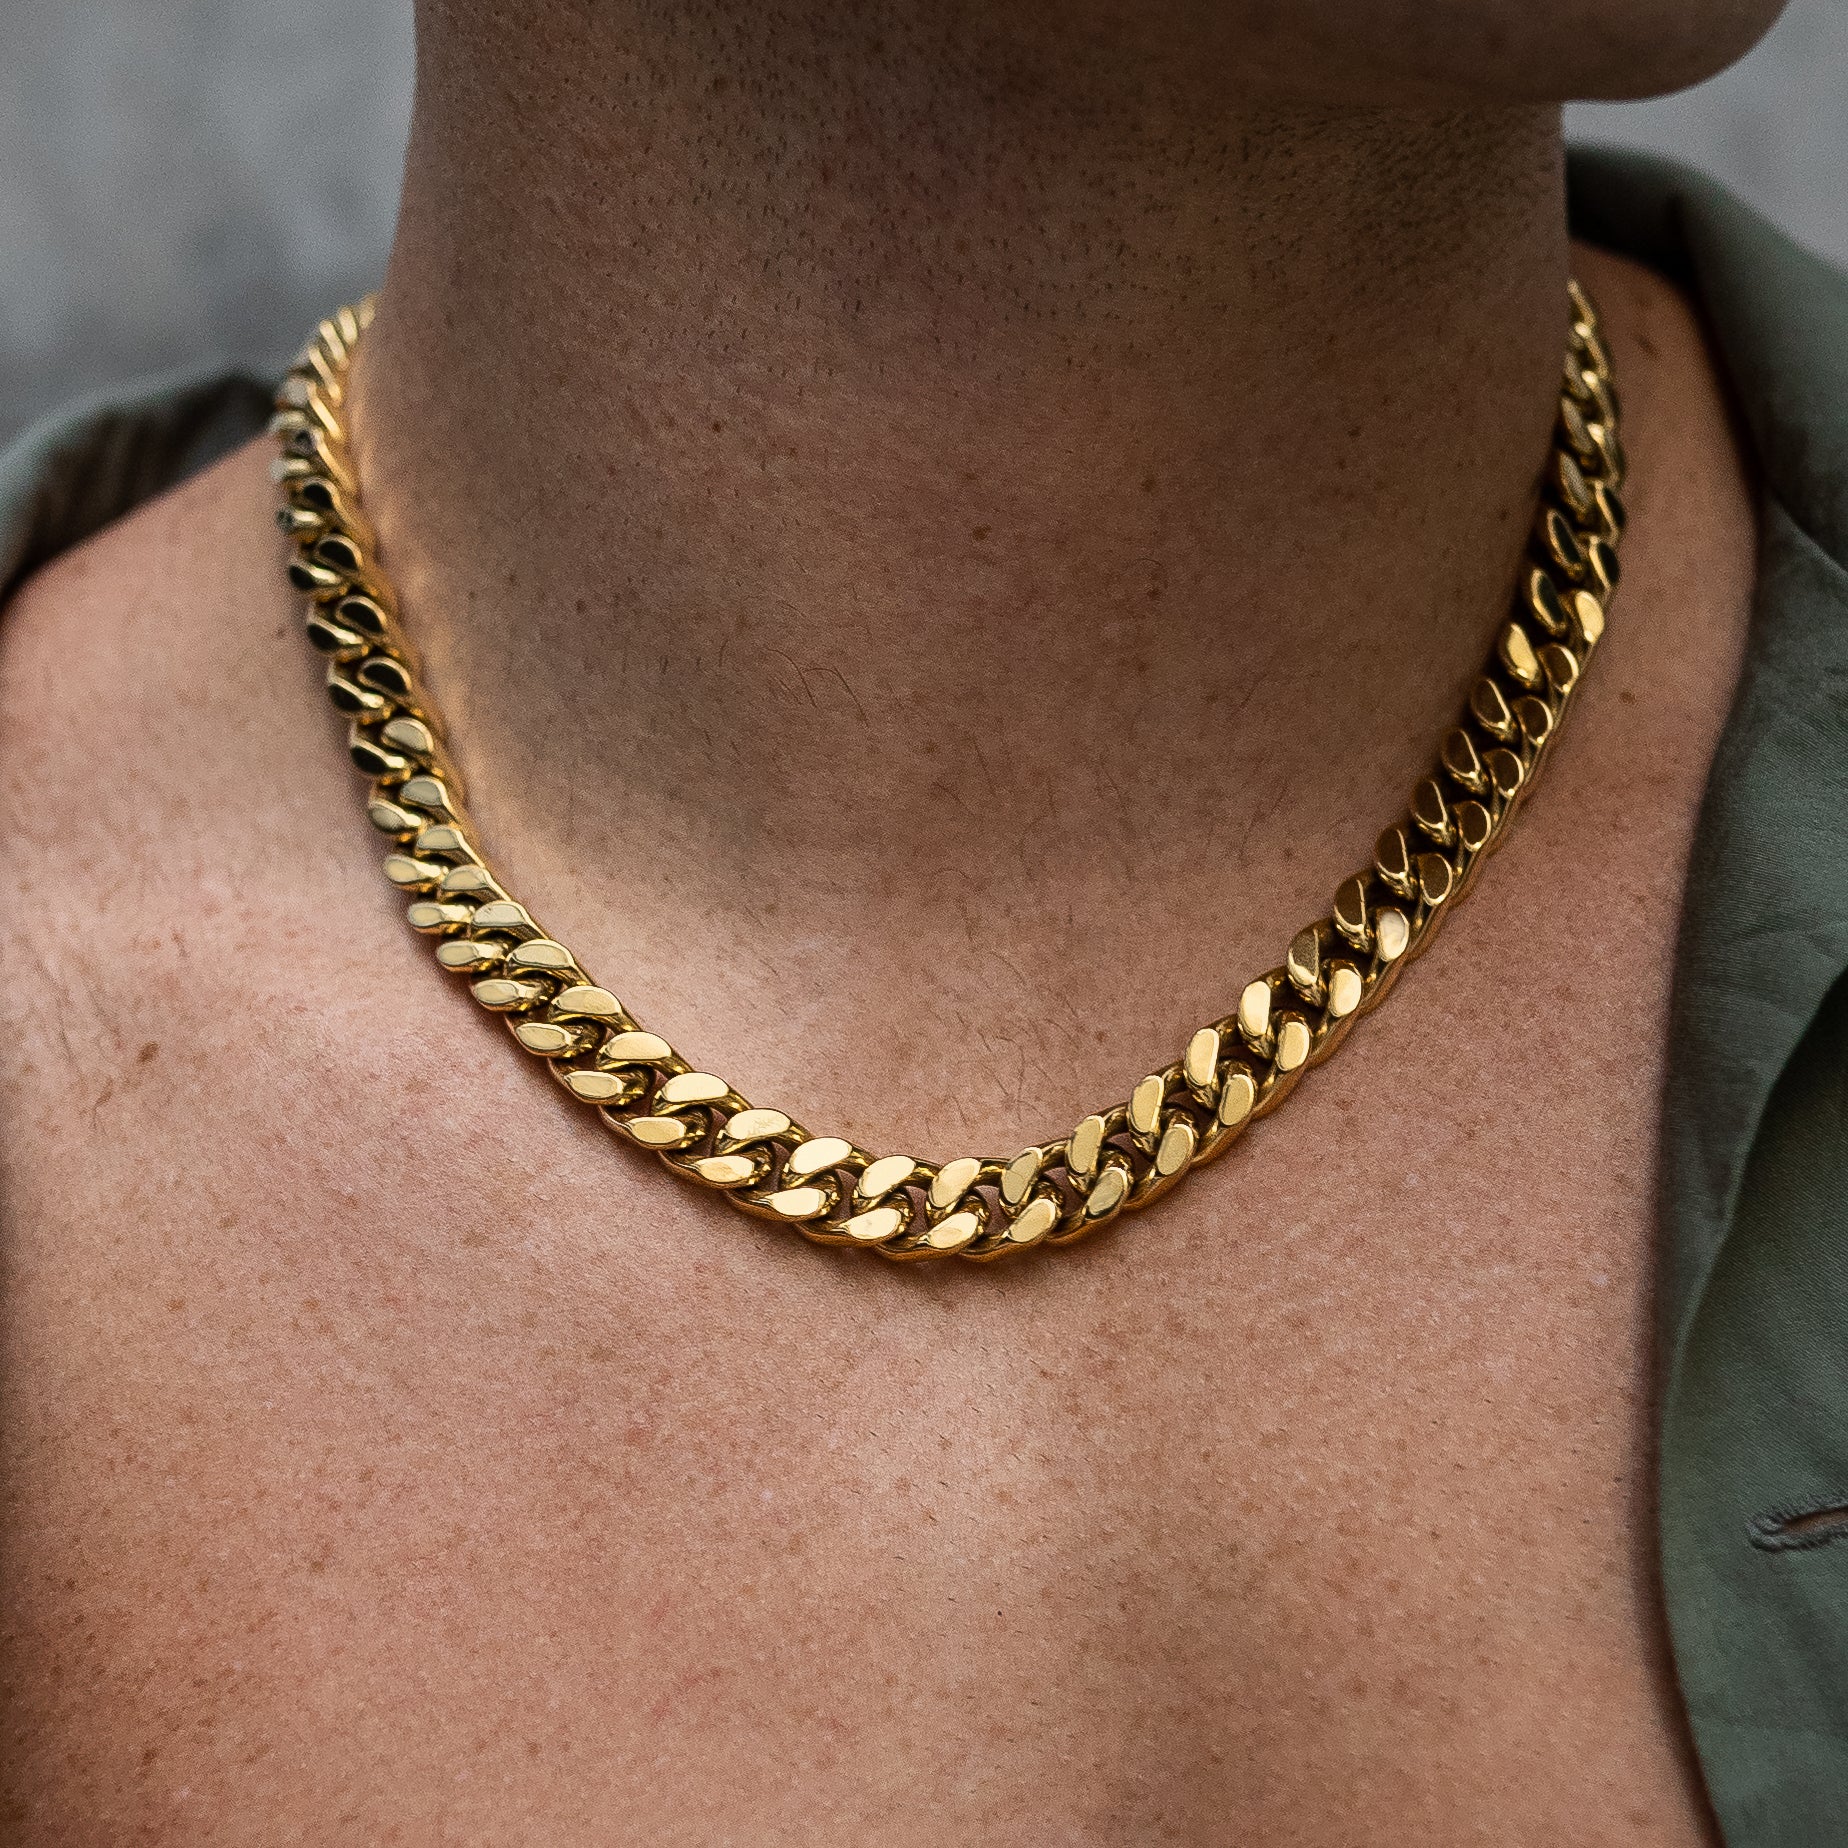 Our Guide on How Much Is 18k Gold Chain Worth in Your Gold Jewelry